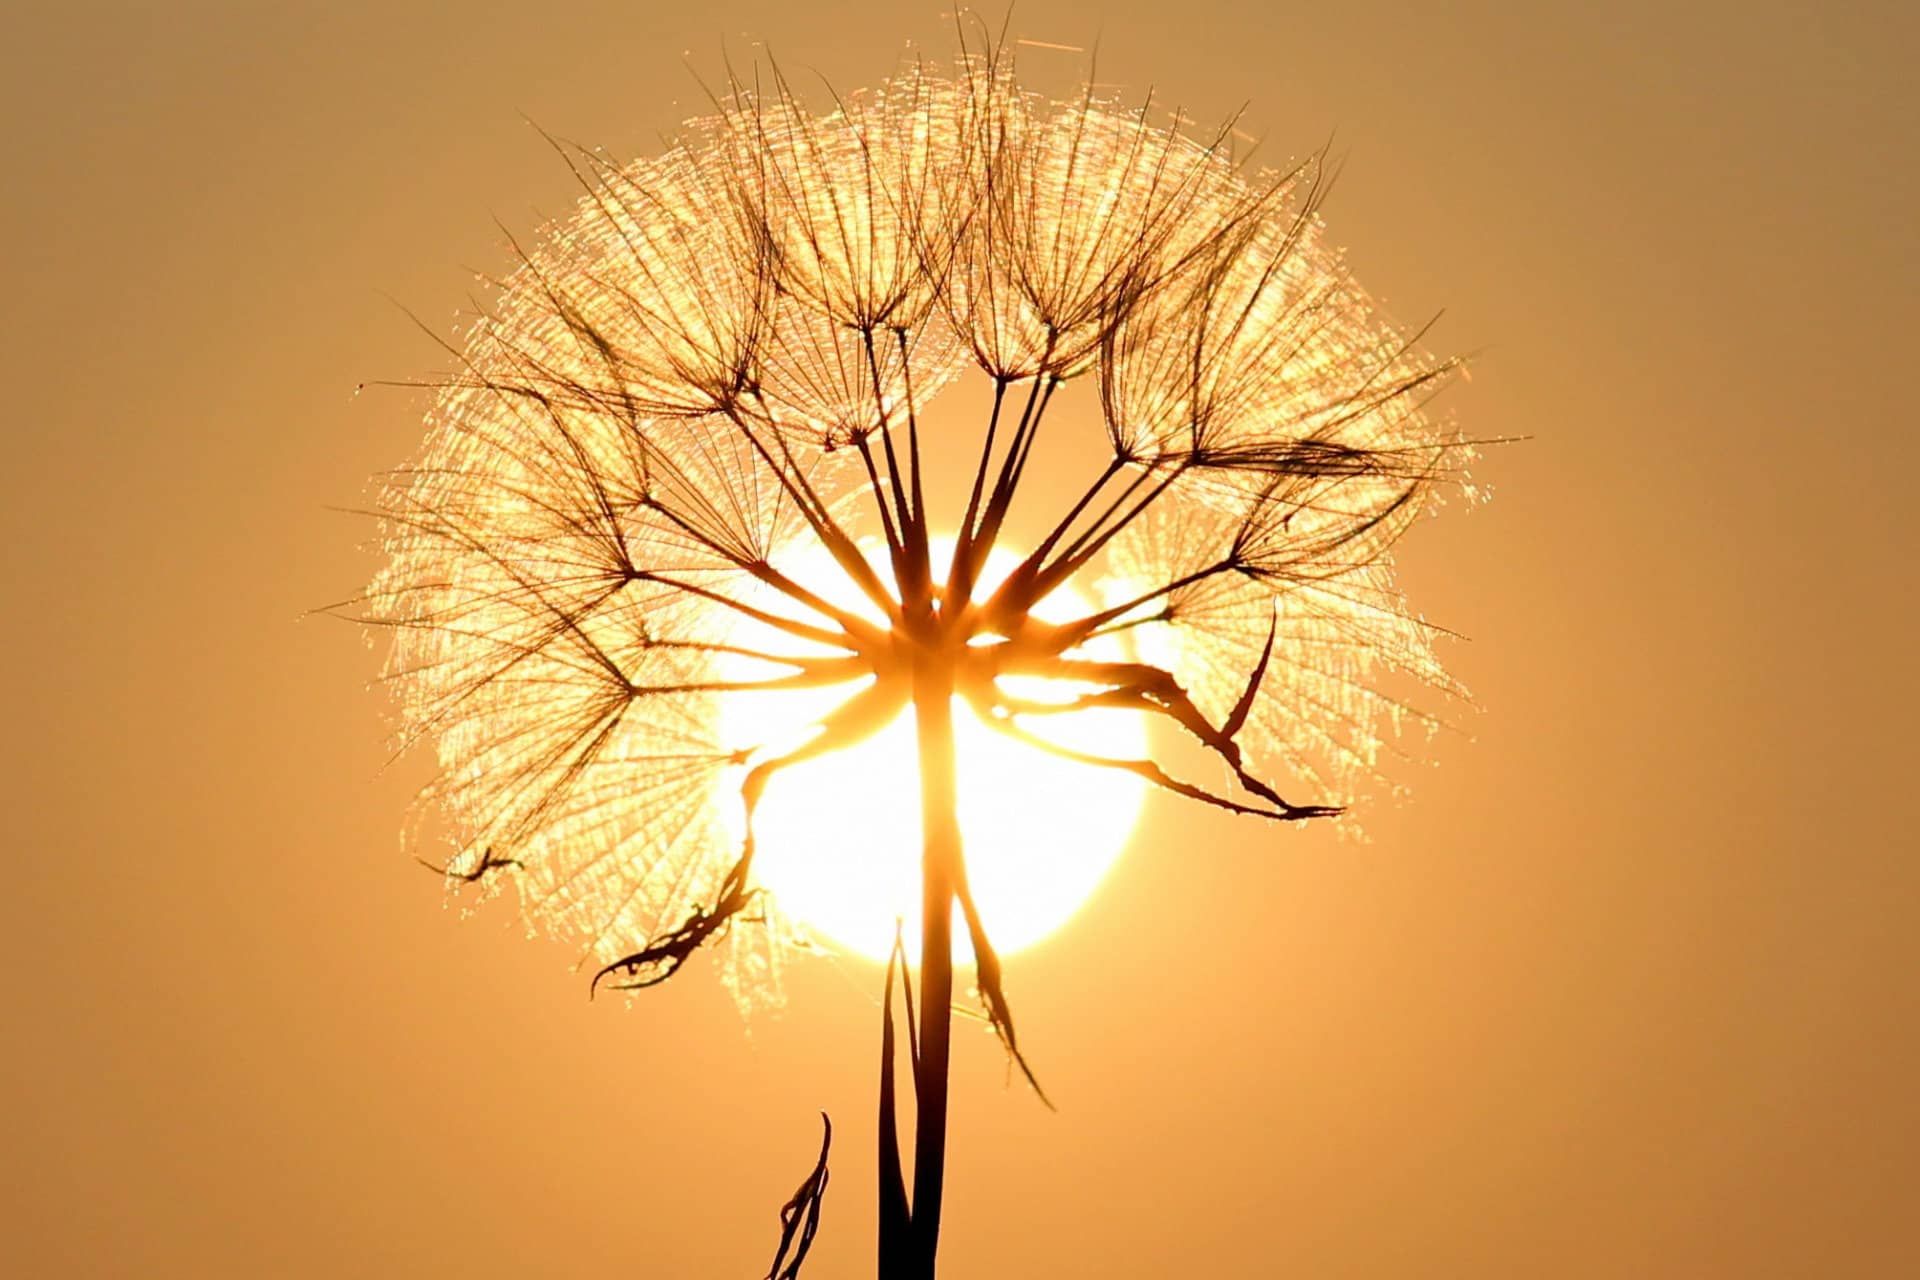 Dandelion Blowball in front of the sun as ball of fire